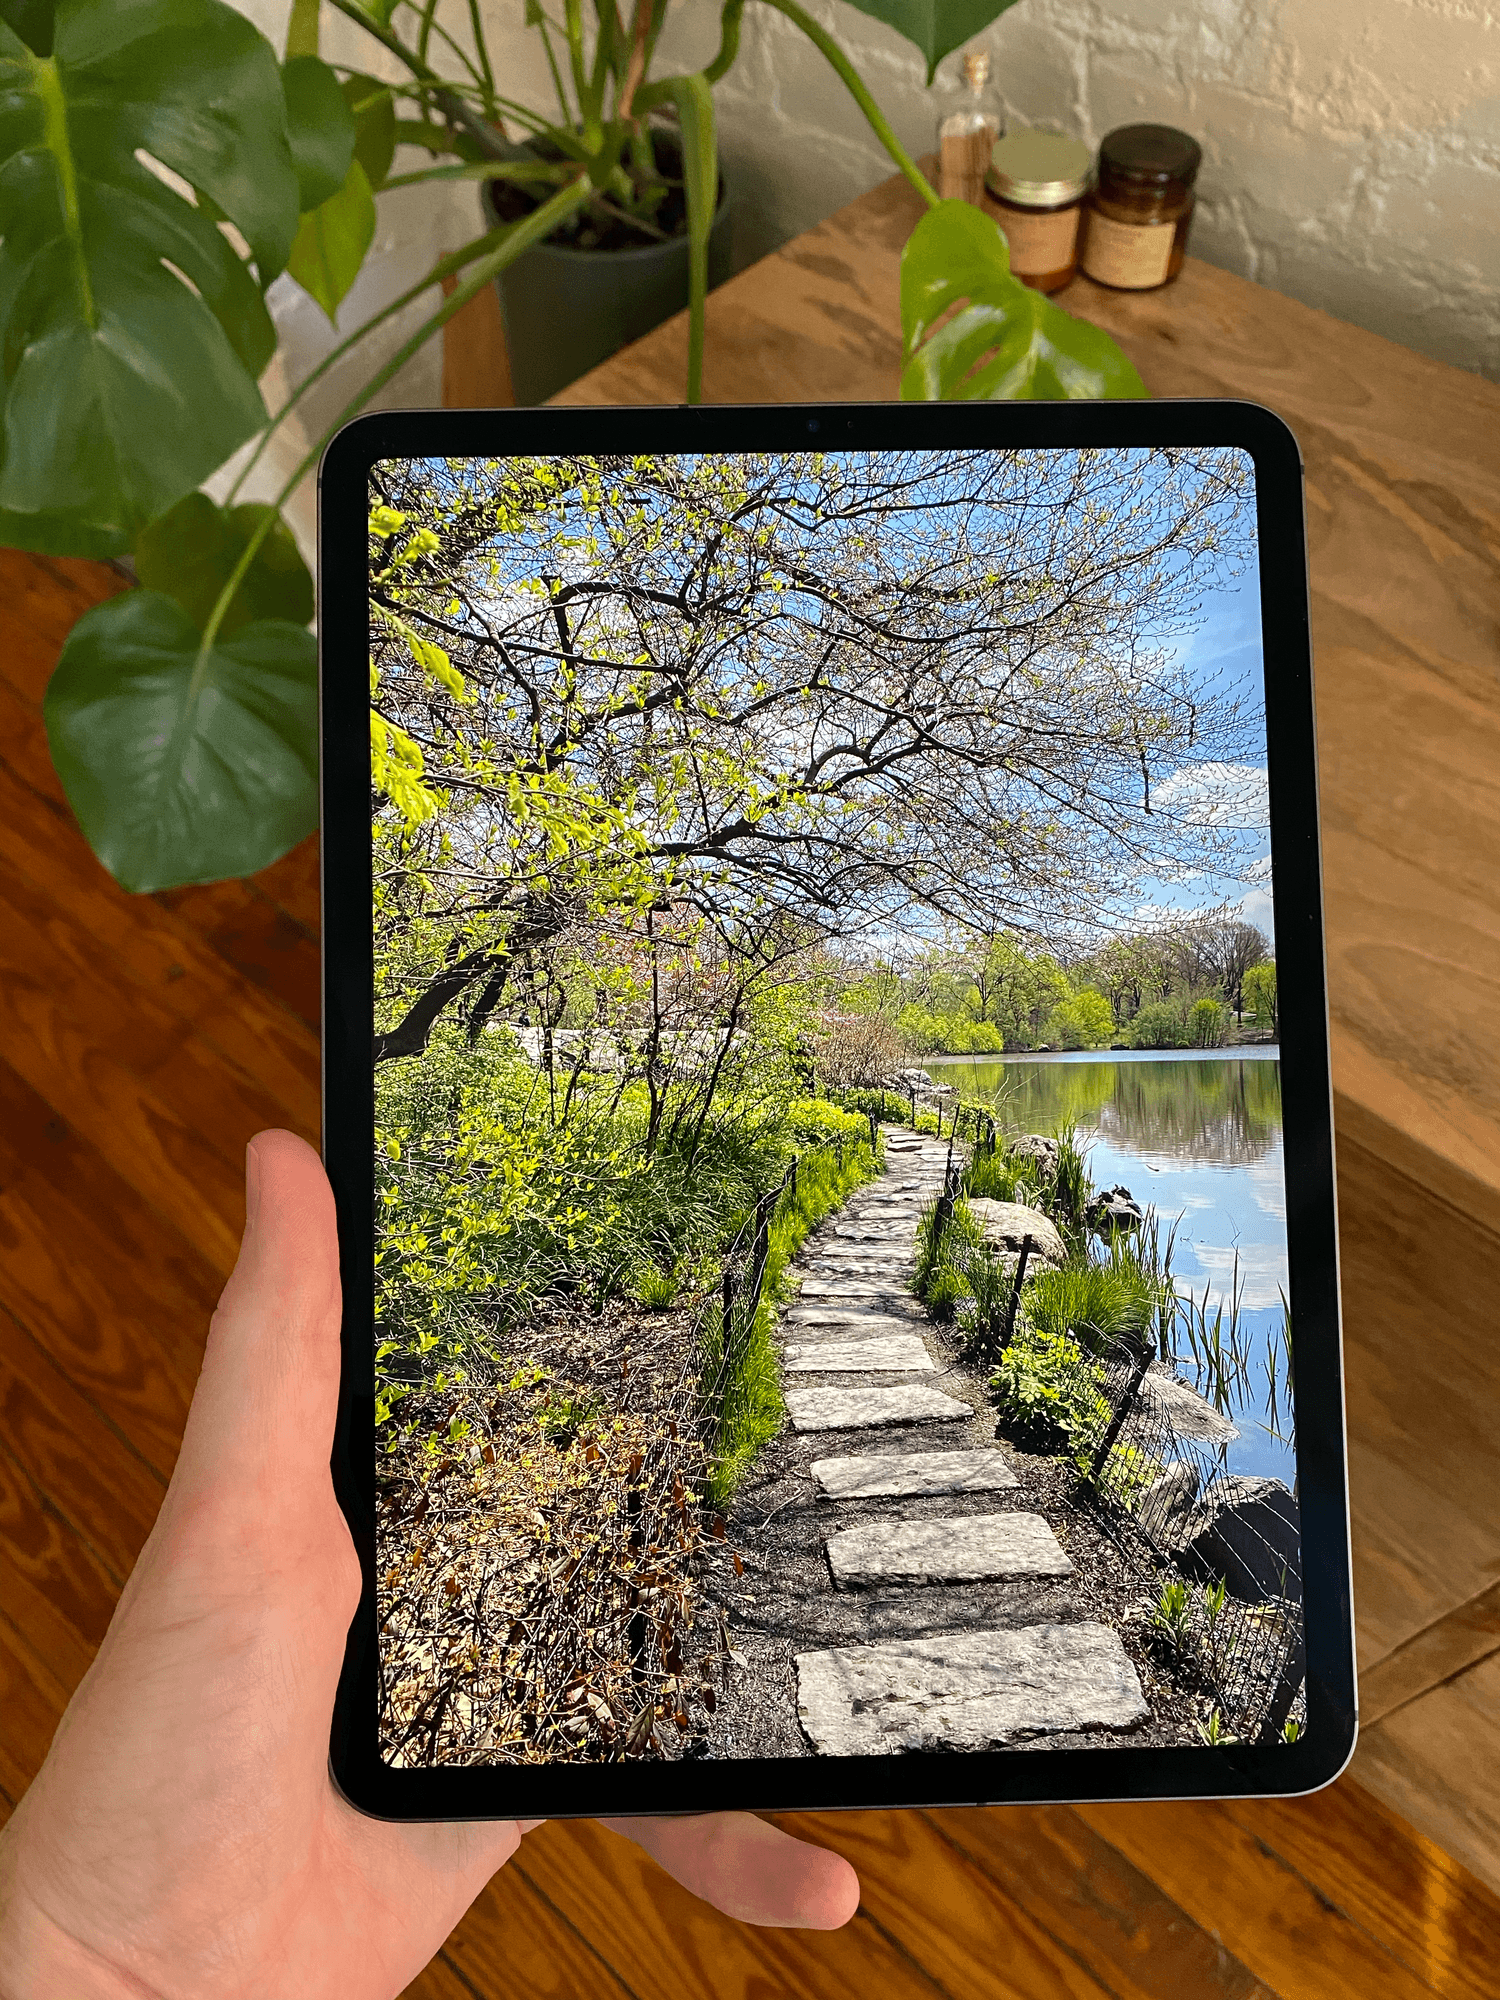 Nothing beats the 11-inch iPad Pro for viewing photos.